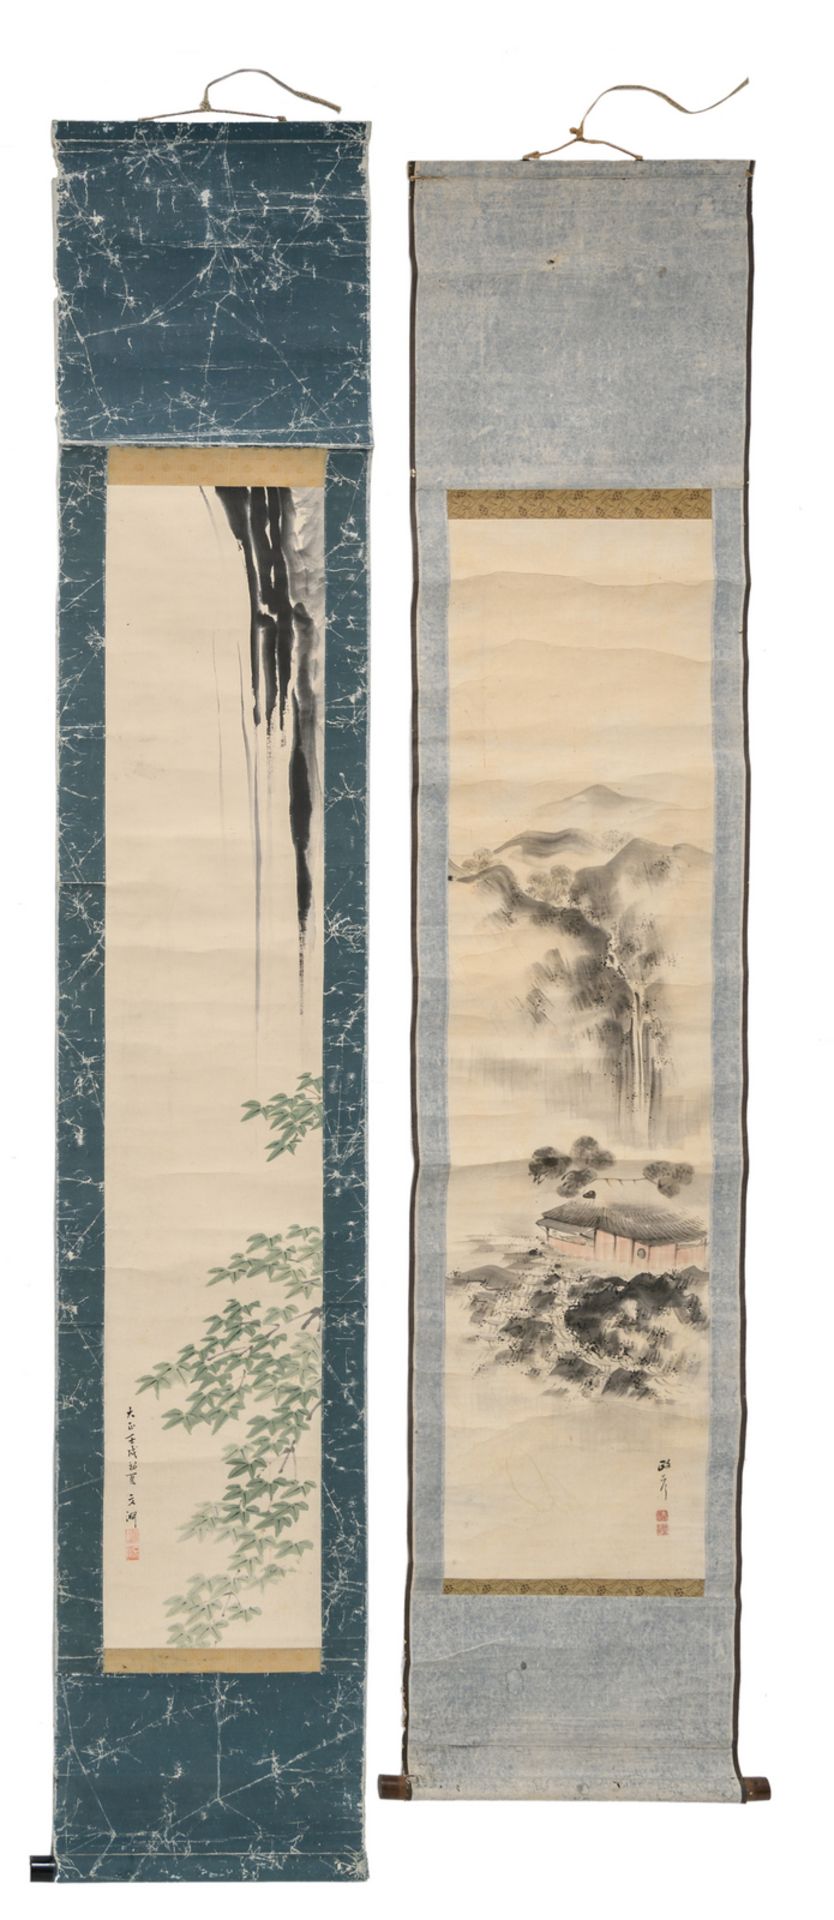 Two Chinese scrolls, Indian ink on paper, one depicting a mountainous landscape with a pavilion in